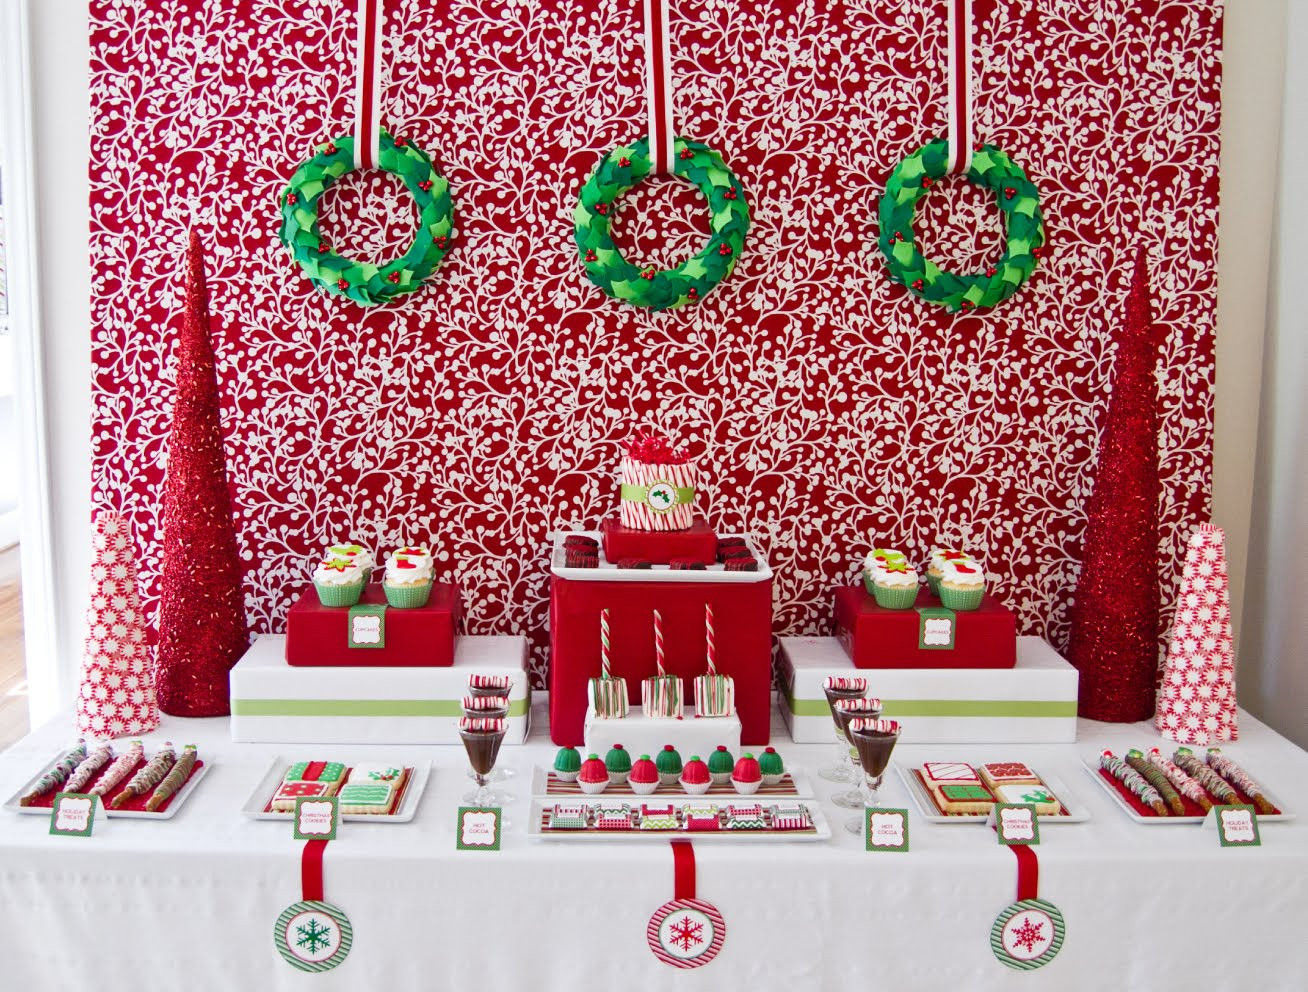 Christmas Party Table Decoration Ideas
 5 Christmas Table Decorations